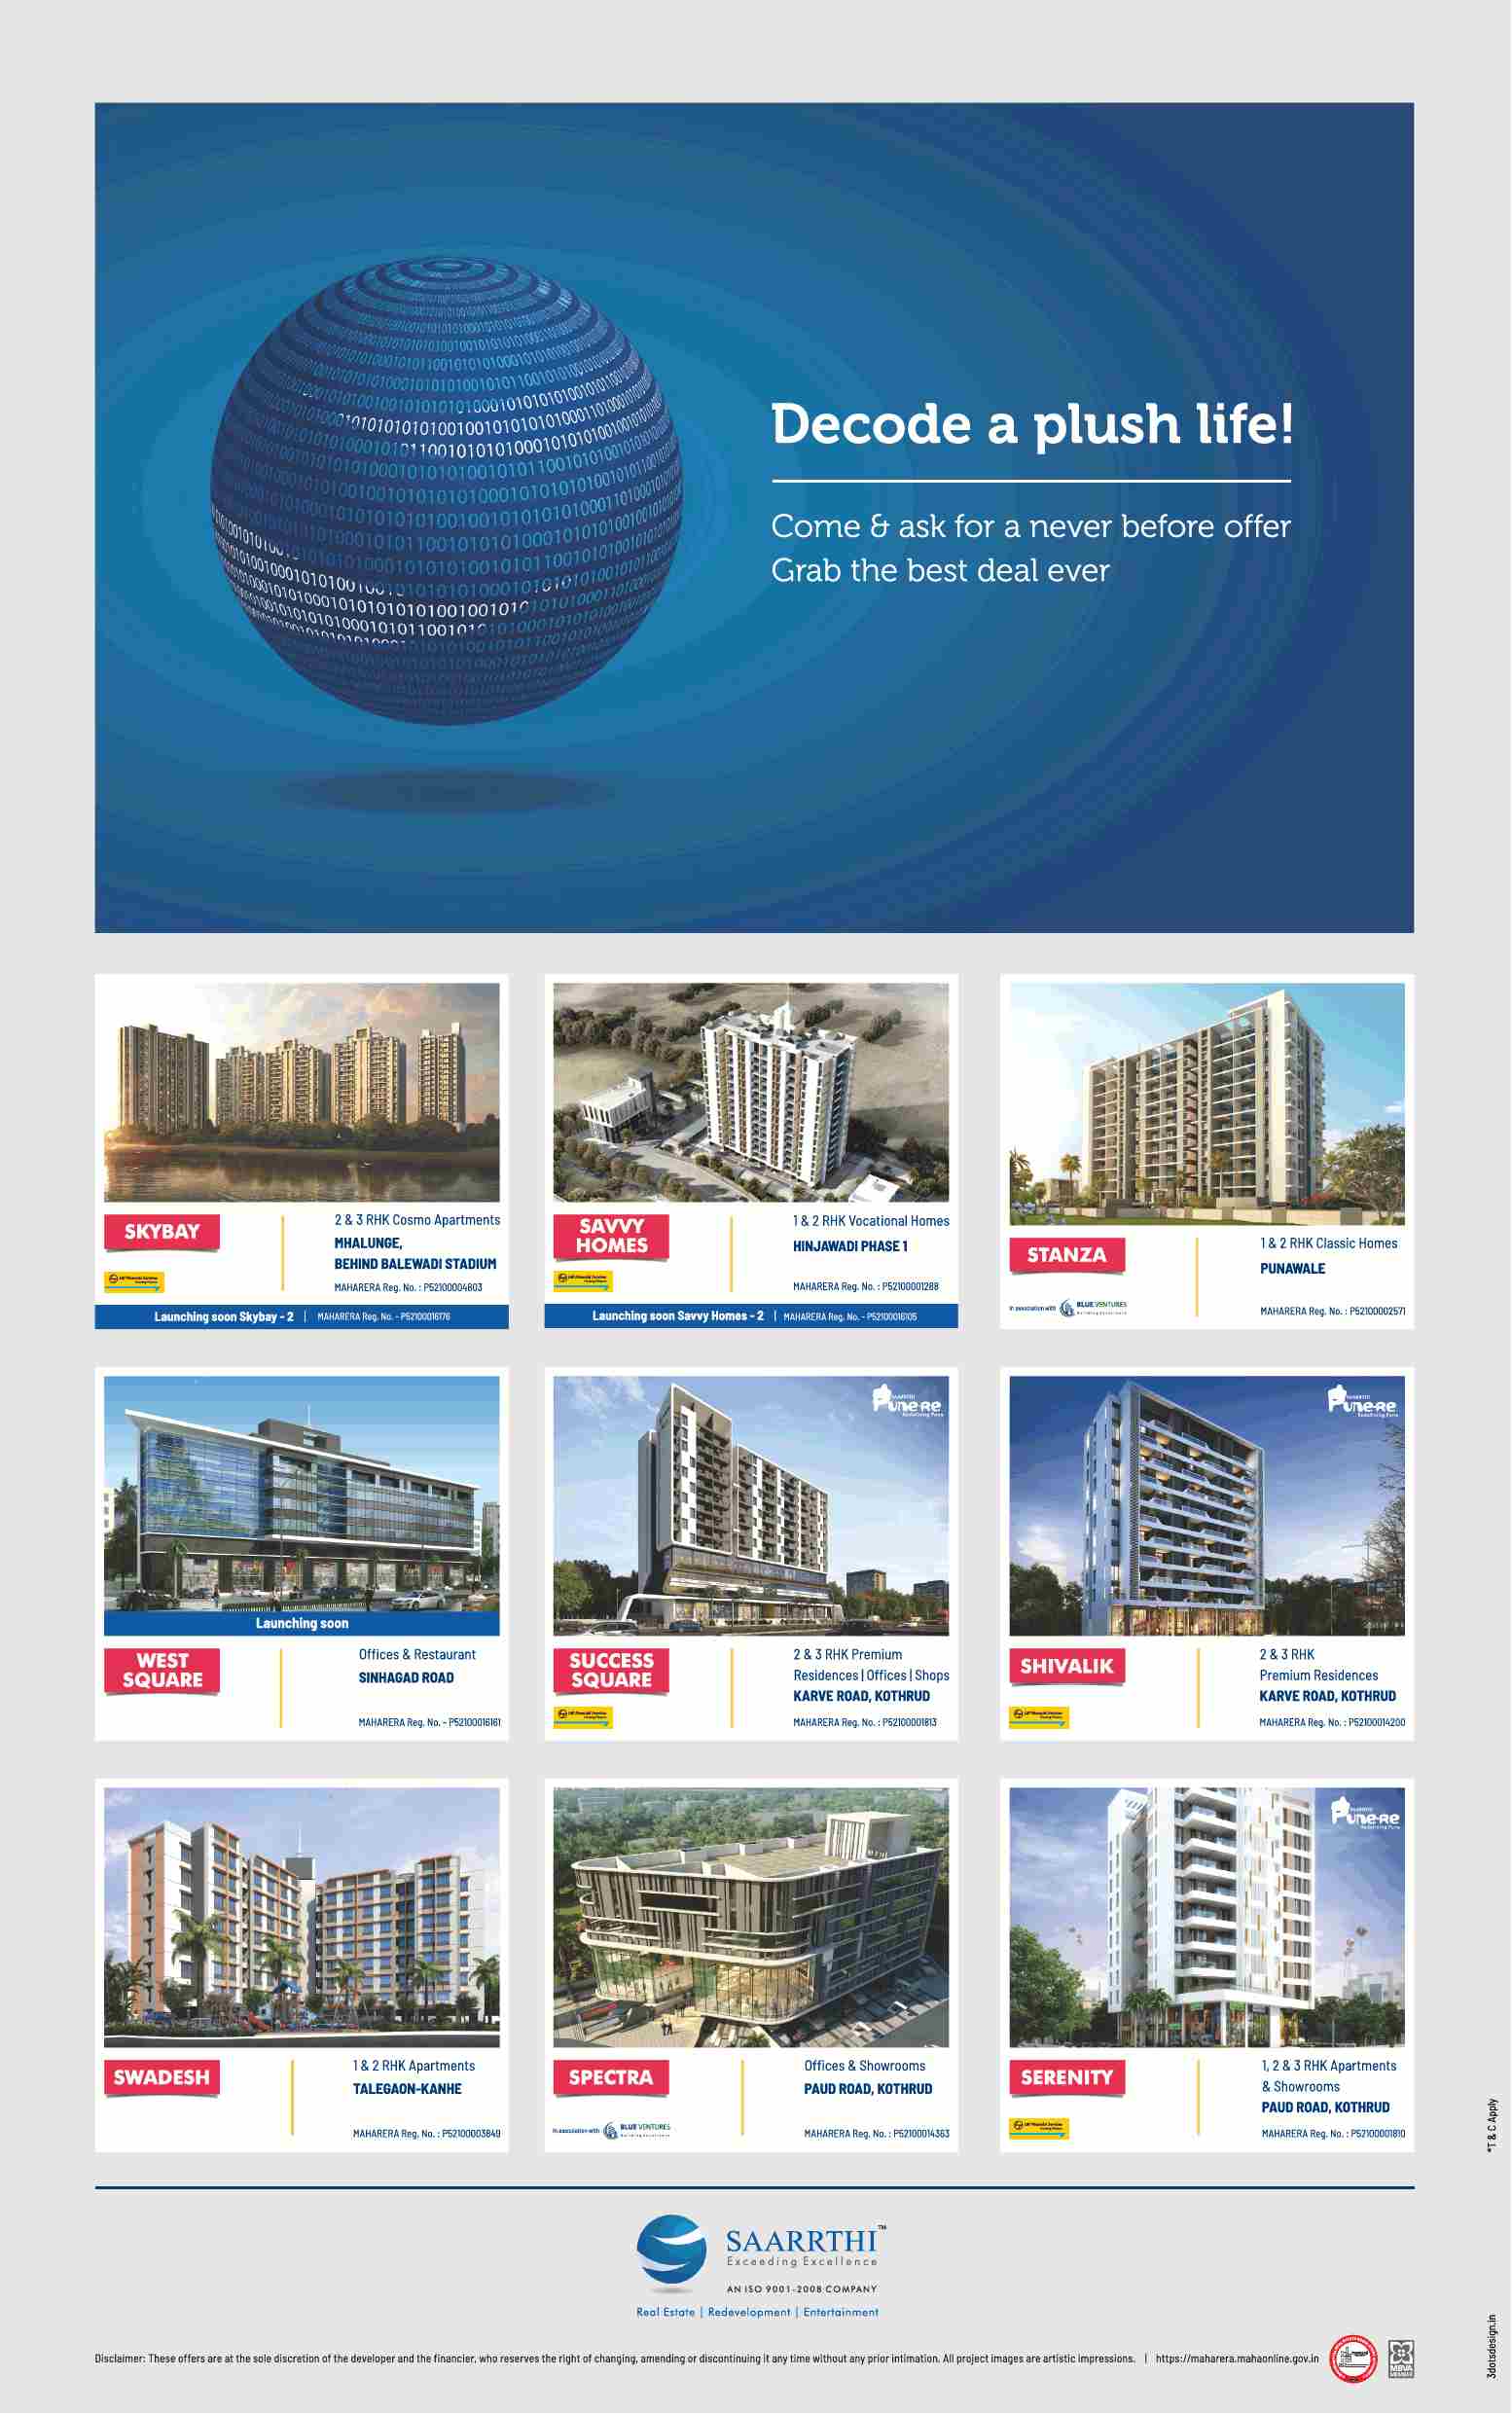 Grab the best deal ever by investing at Saarrthi Group properties in Pune